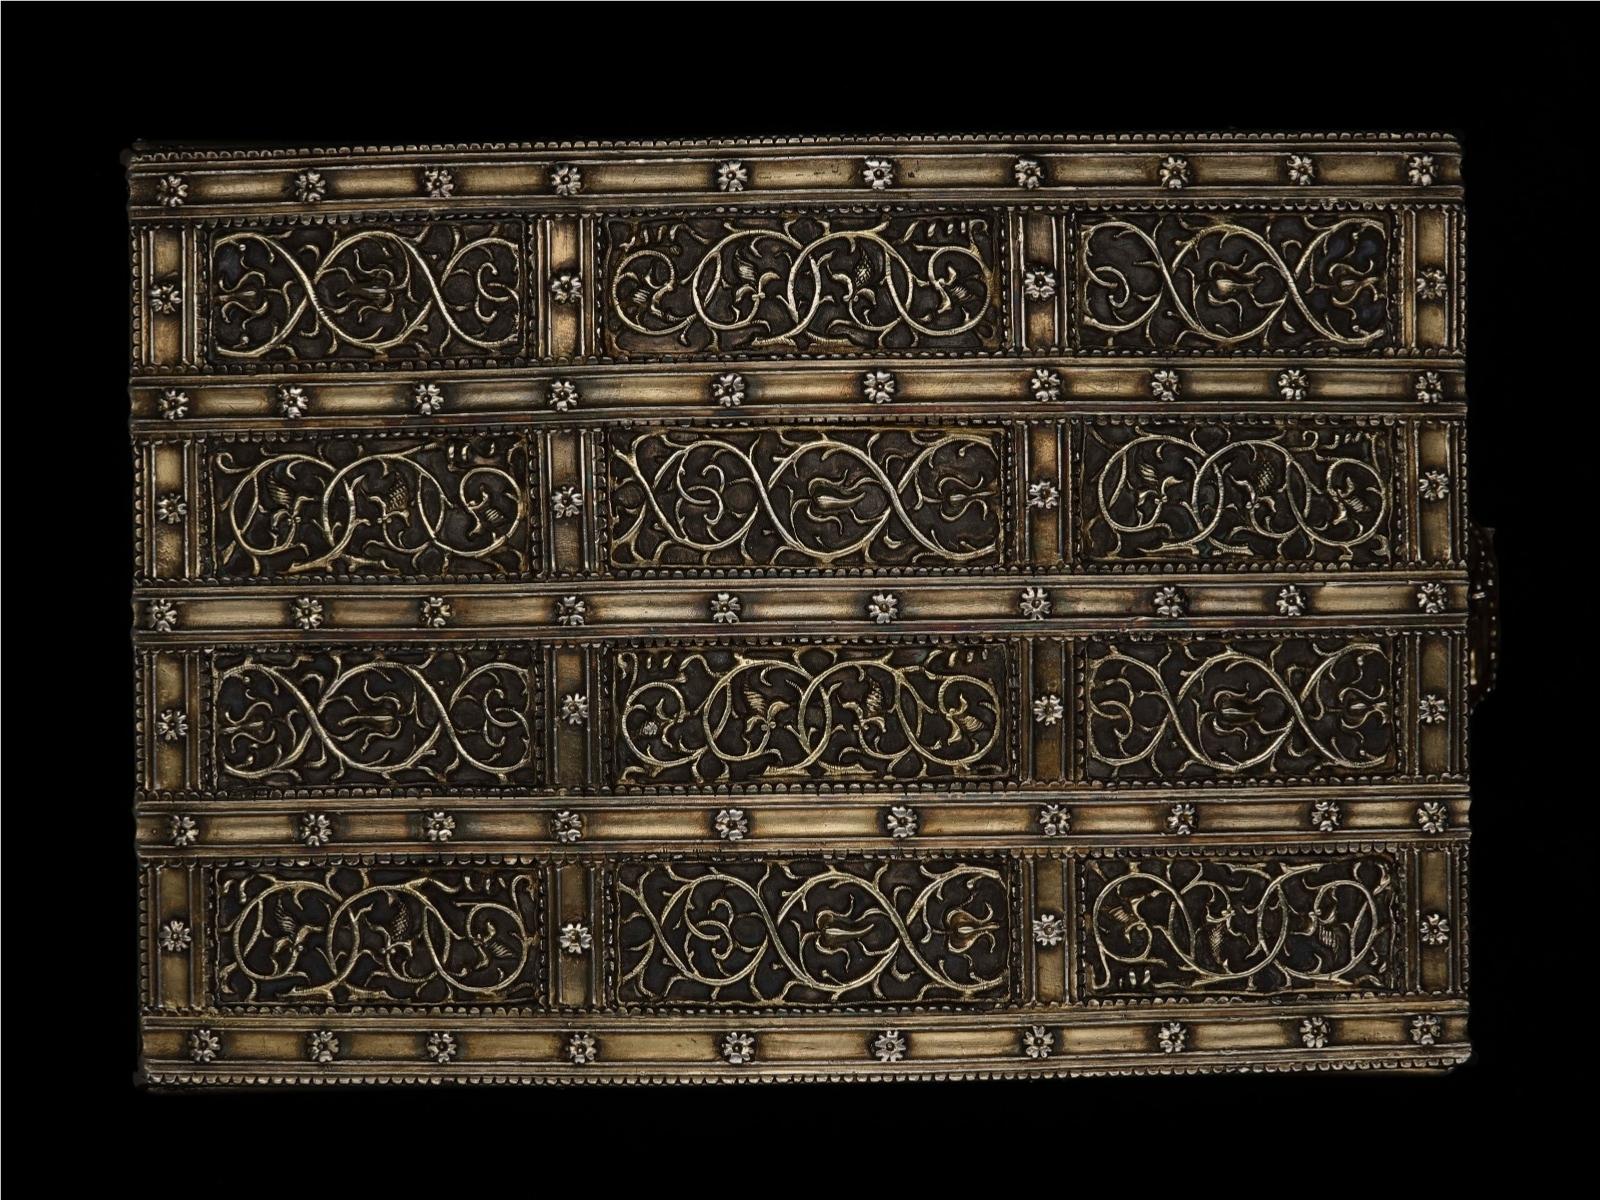 Strapwork on the casket's lid. © National Museums Scotland